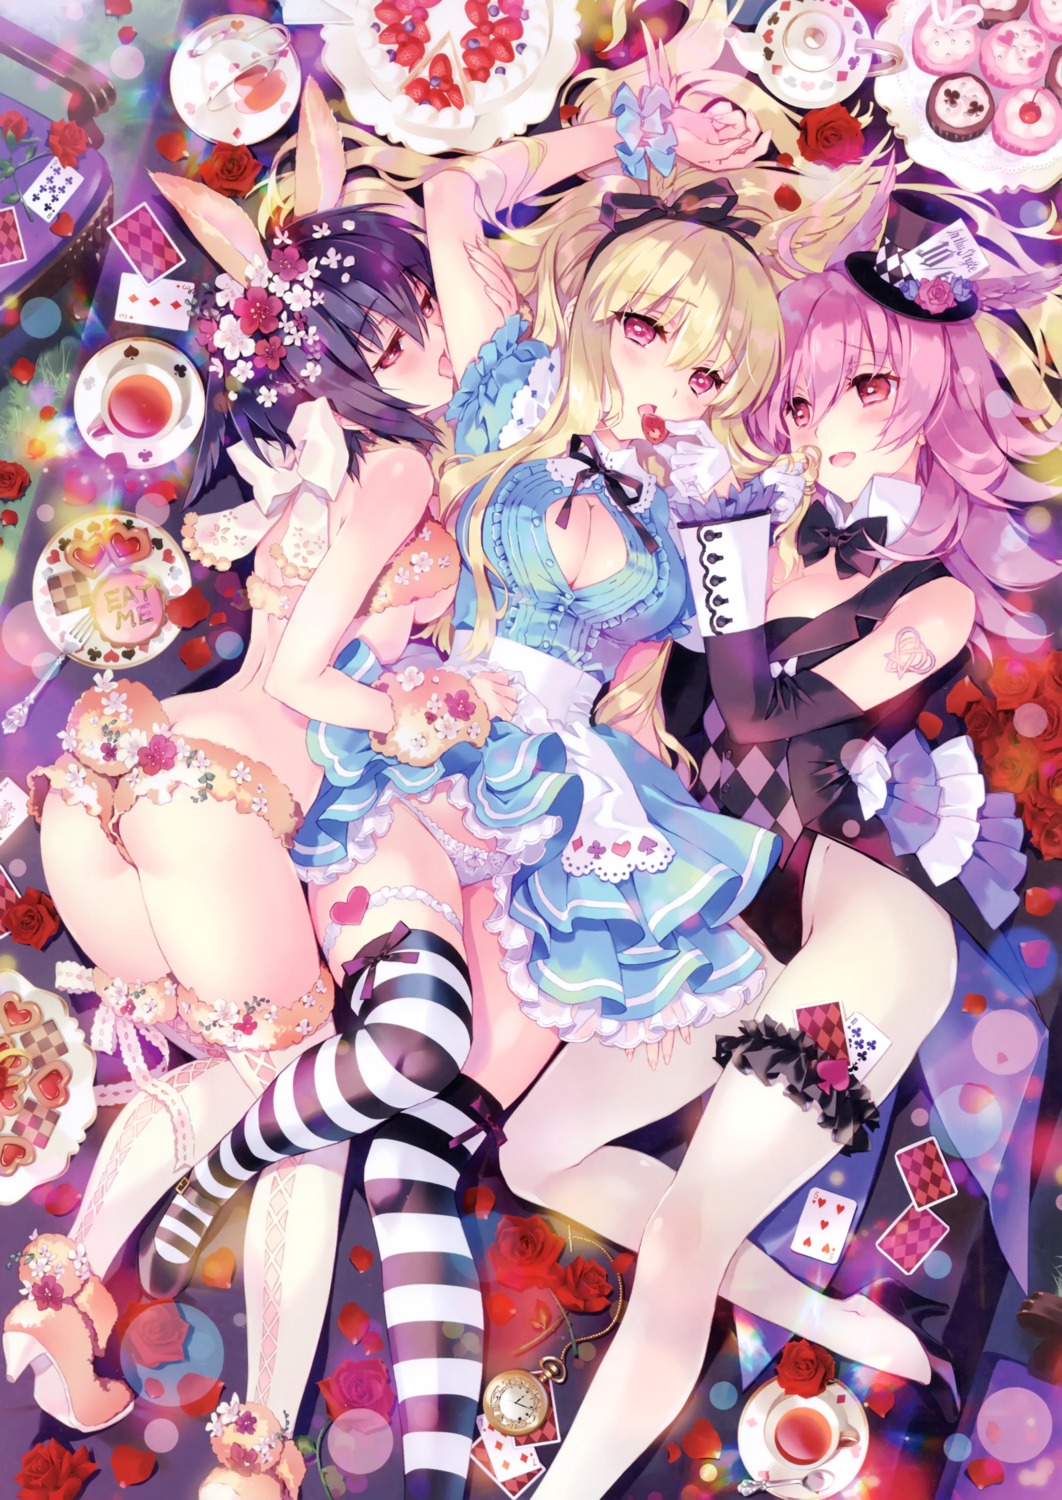 alice alice_in_wonderland animal_ears ass bunny_ears bunny_girl carnelian cleavage cosplay dress fate/grand_order garter heels hildr_(fate/grand_order) no_bra open_shirt ortlinde_(fate/grand_order) pantsu pantyhose skirt_lift tail tattoo thighhighs thrud_(fate/grand_order) underboob valkyrie_(fate/grand_order) yuri